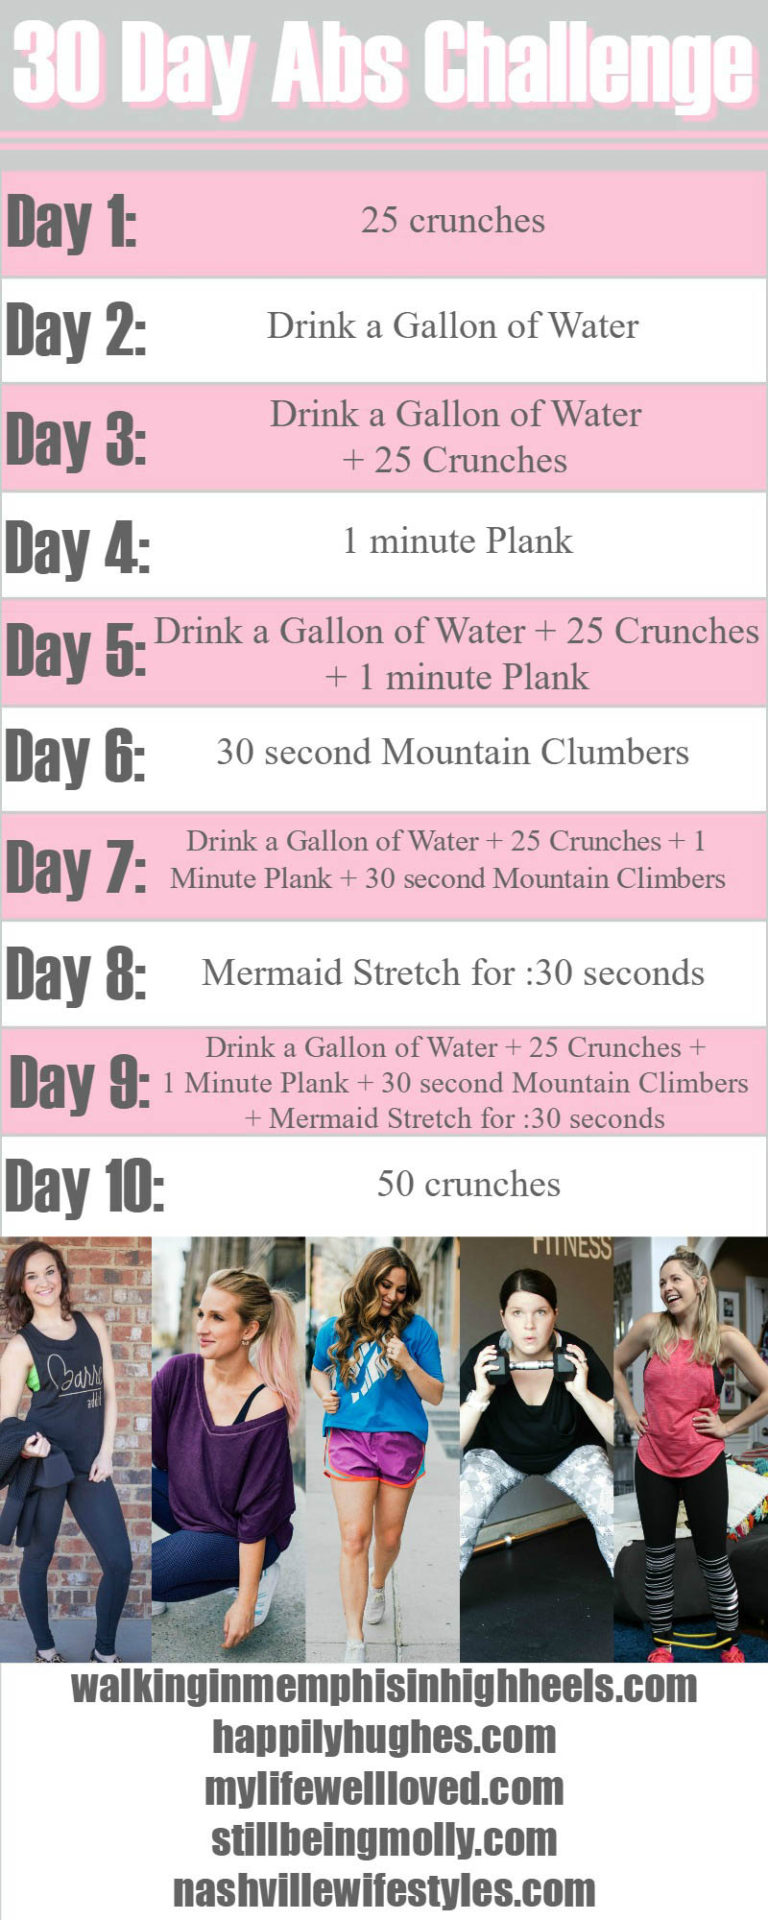 30 Day Ab Challenge Workout with CVS